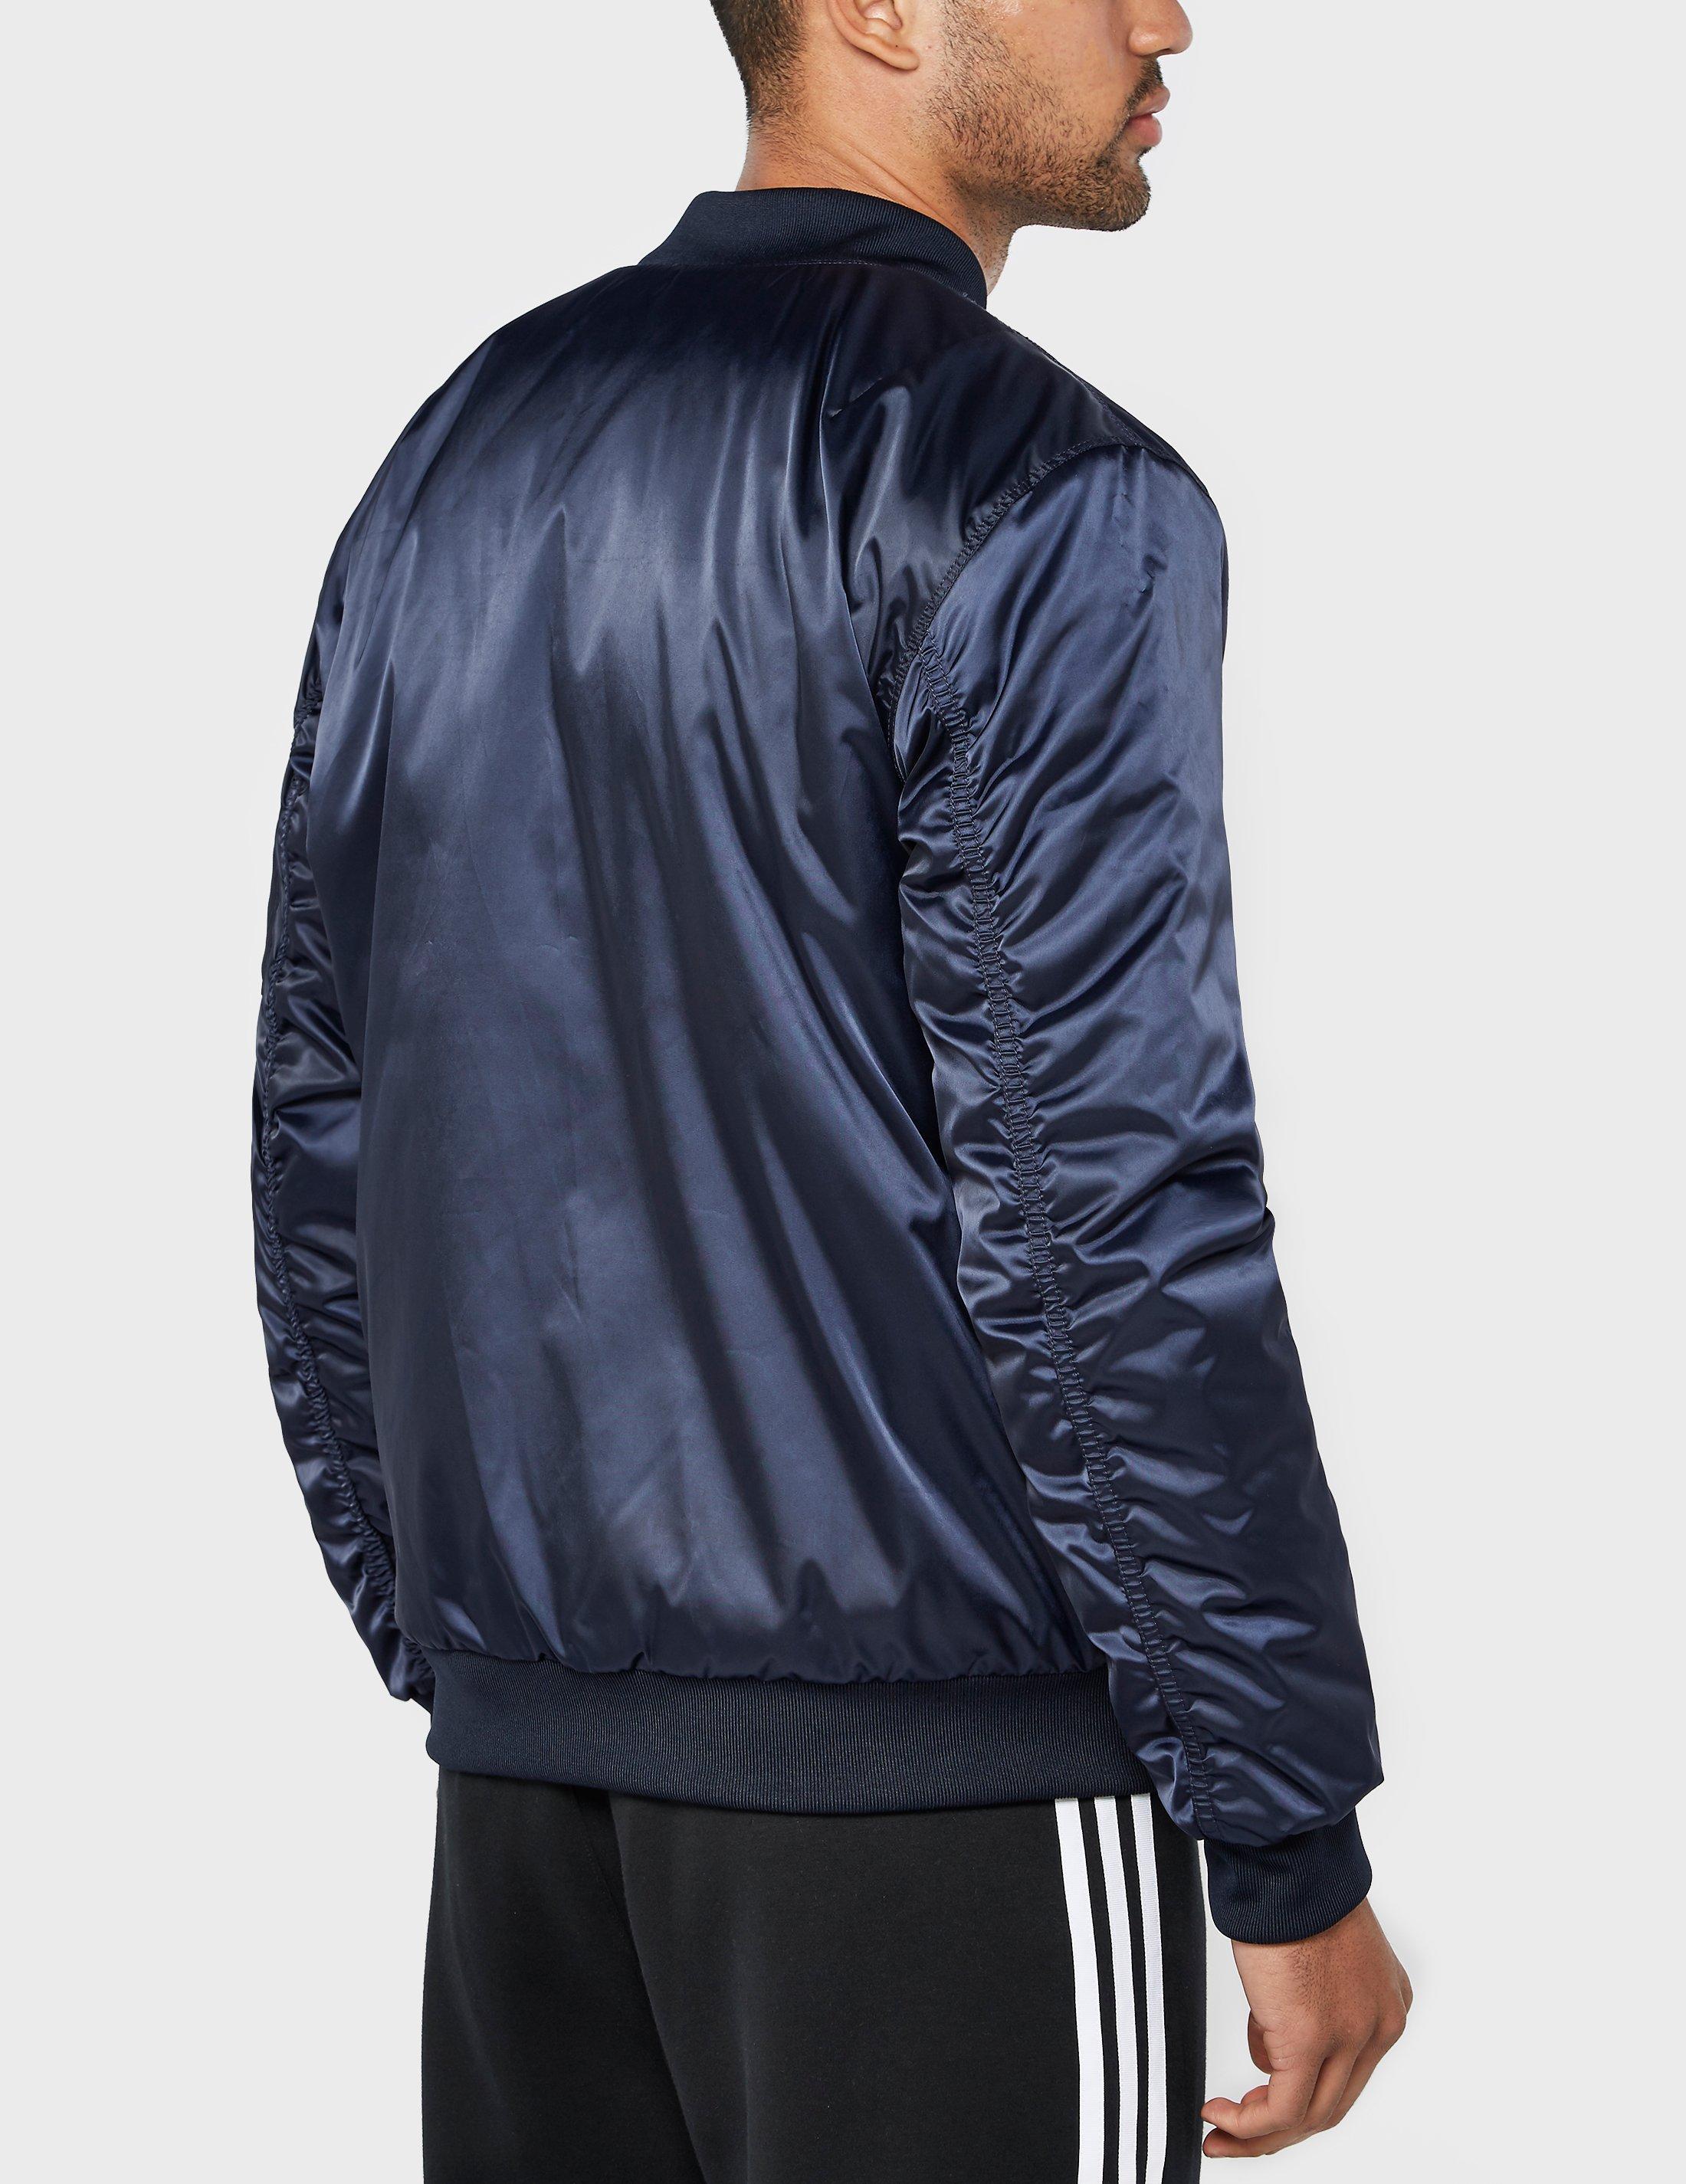 adidas Originals Synthetic Ma1 Superstar Bomber Jacket in Blue for Men - Lyst